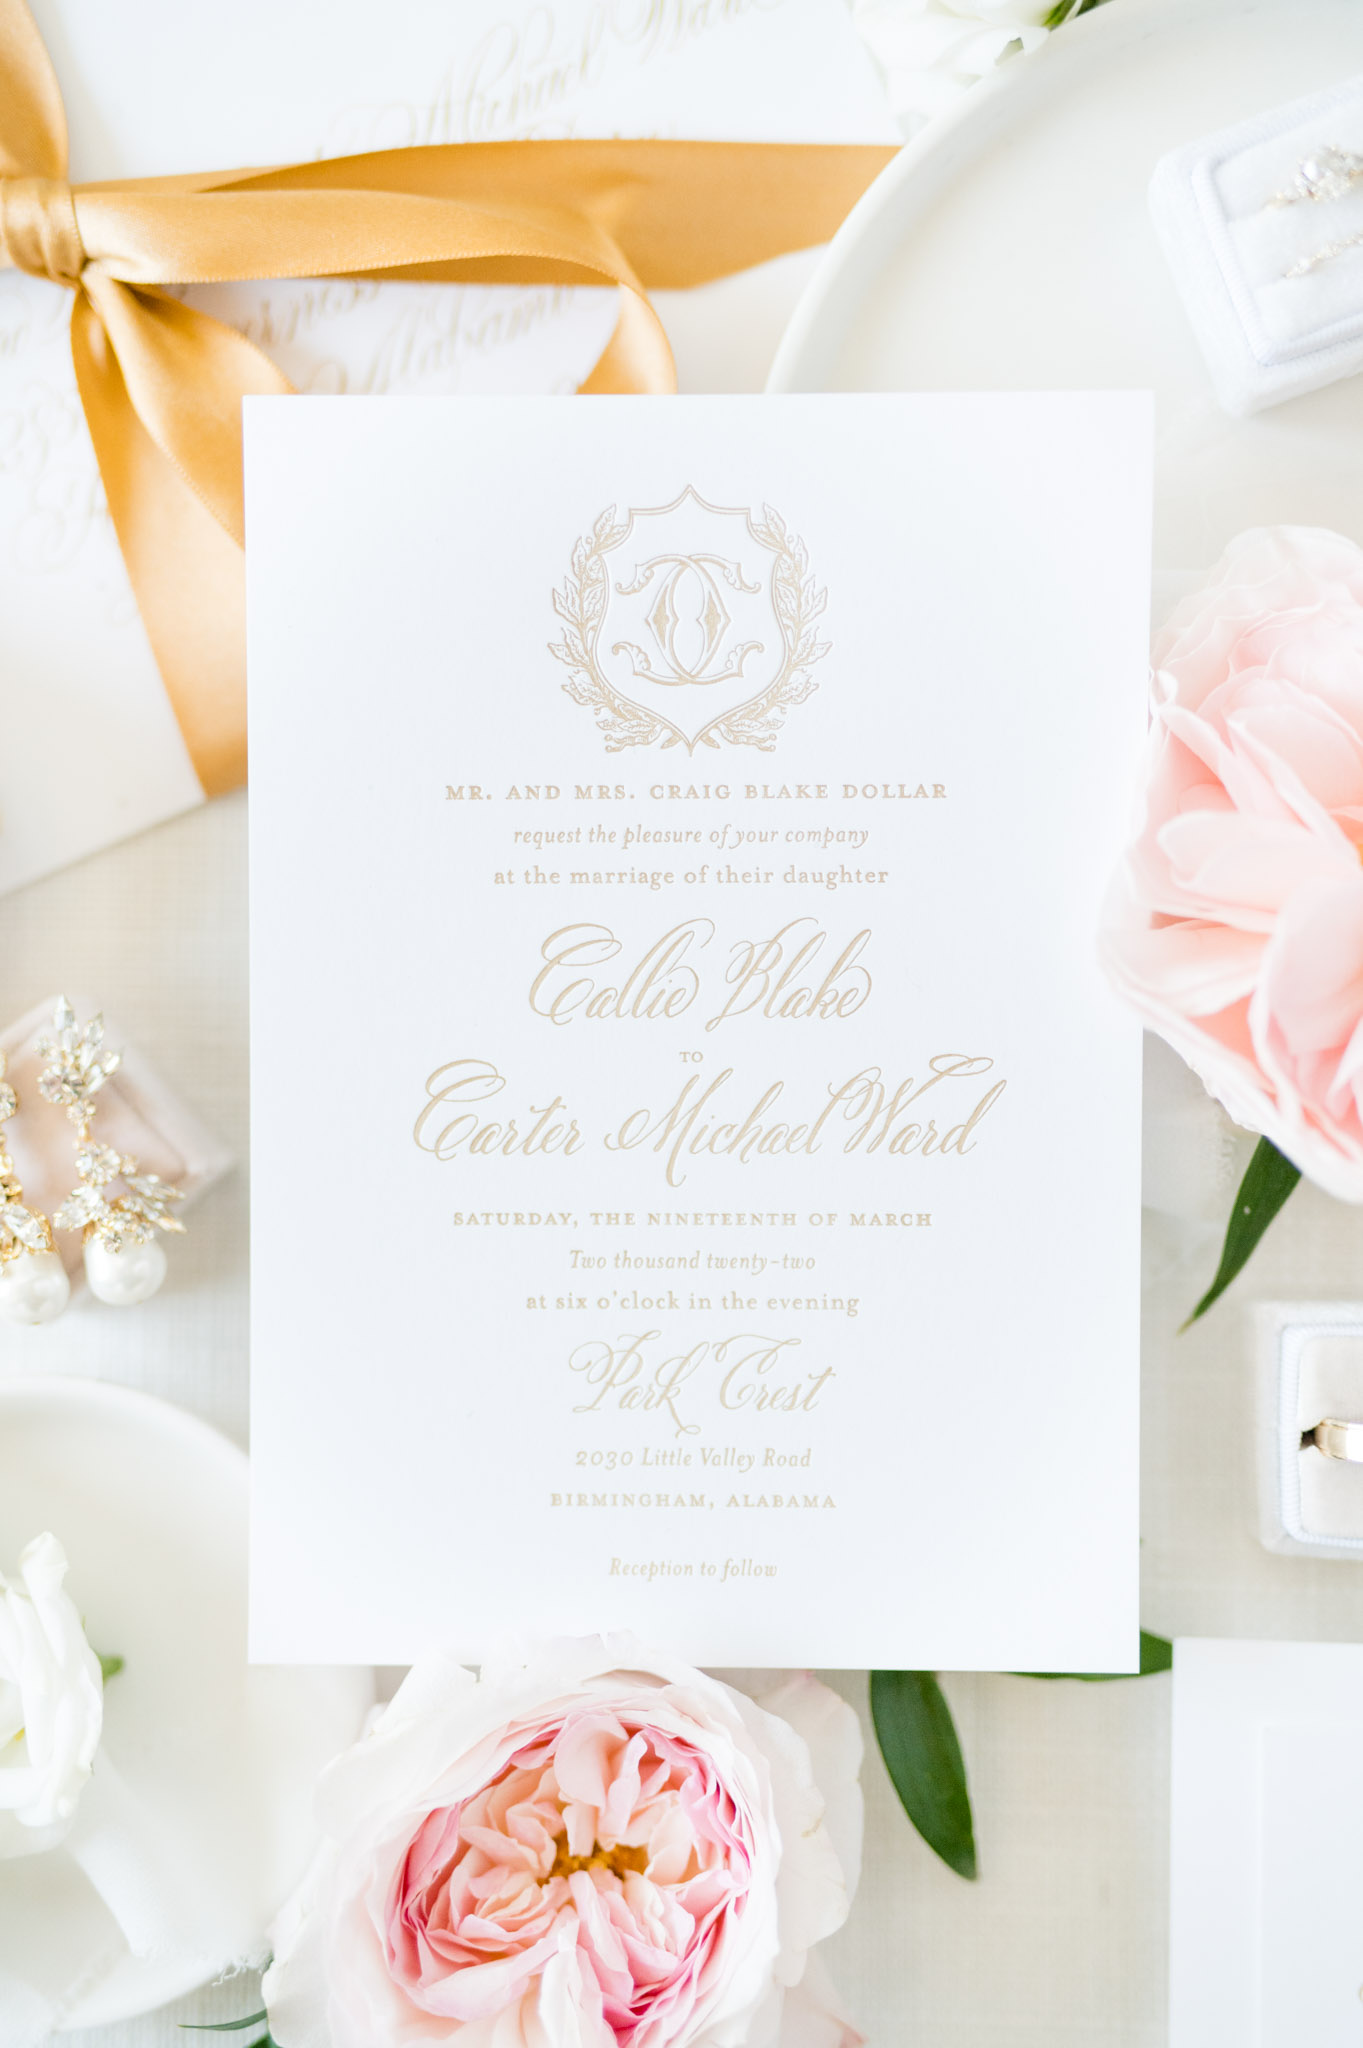 Close up of wedding invitation with monogramed crest.